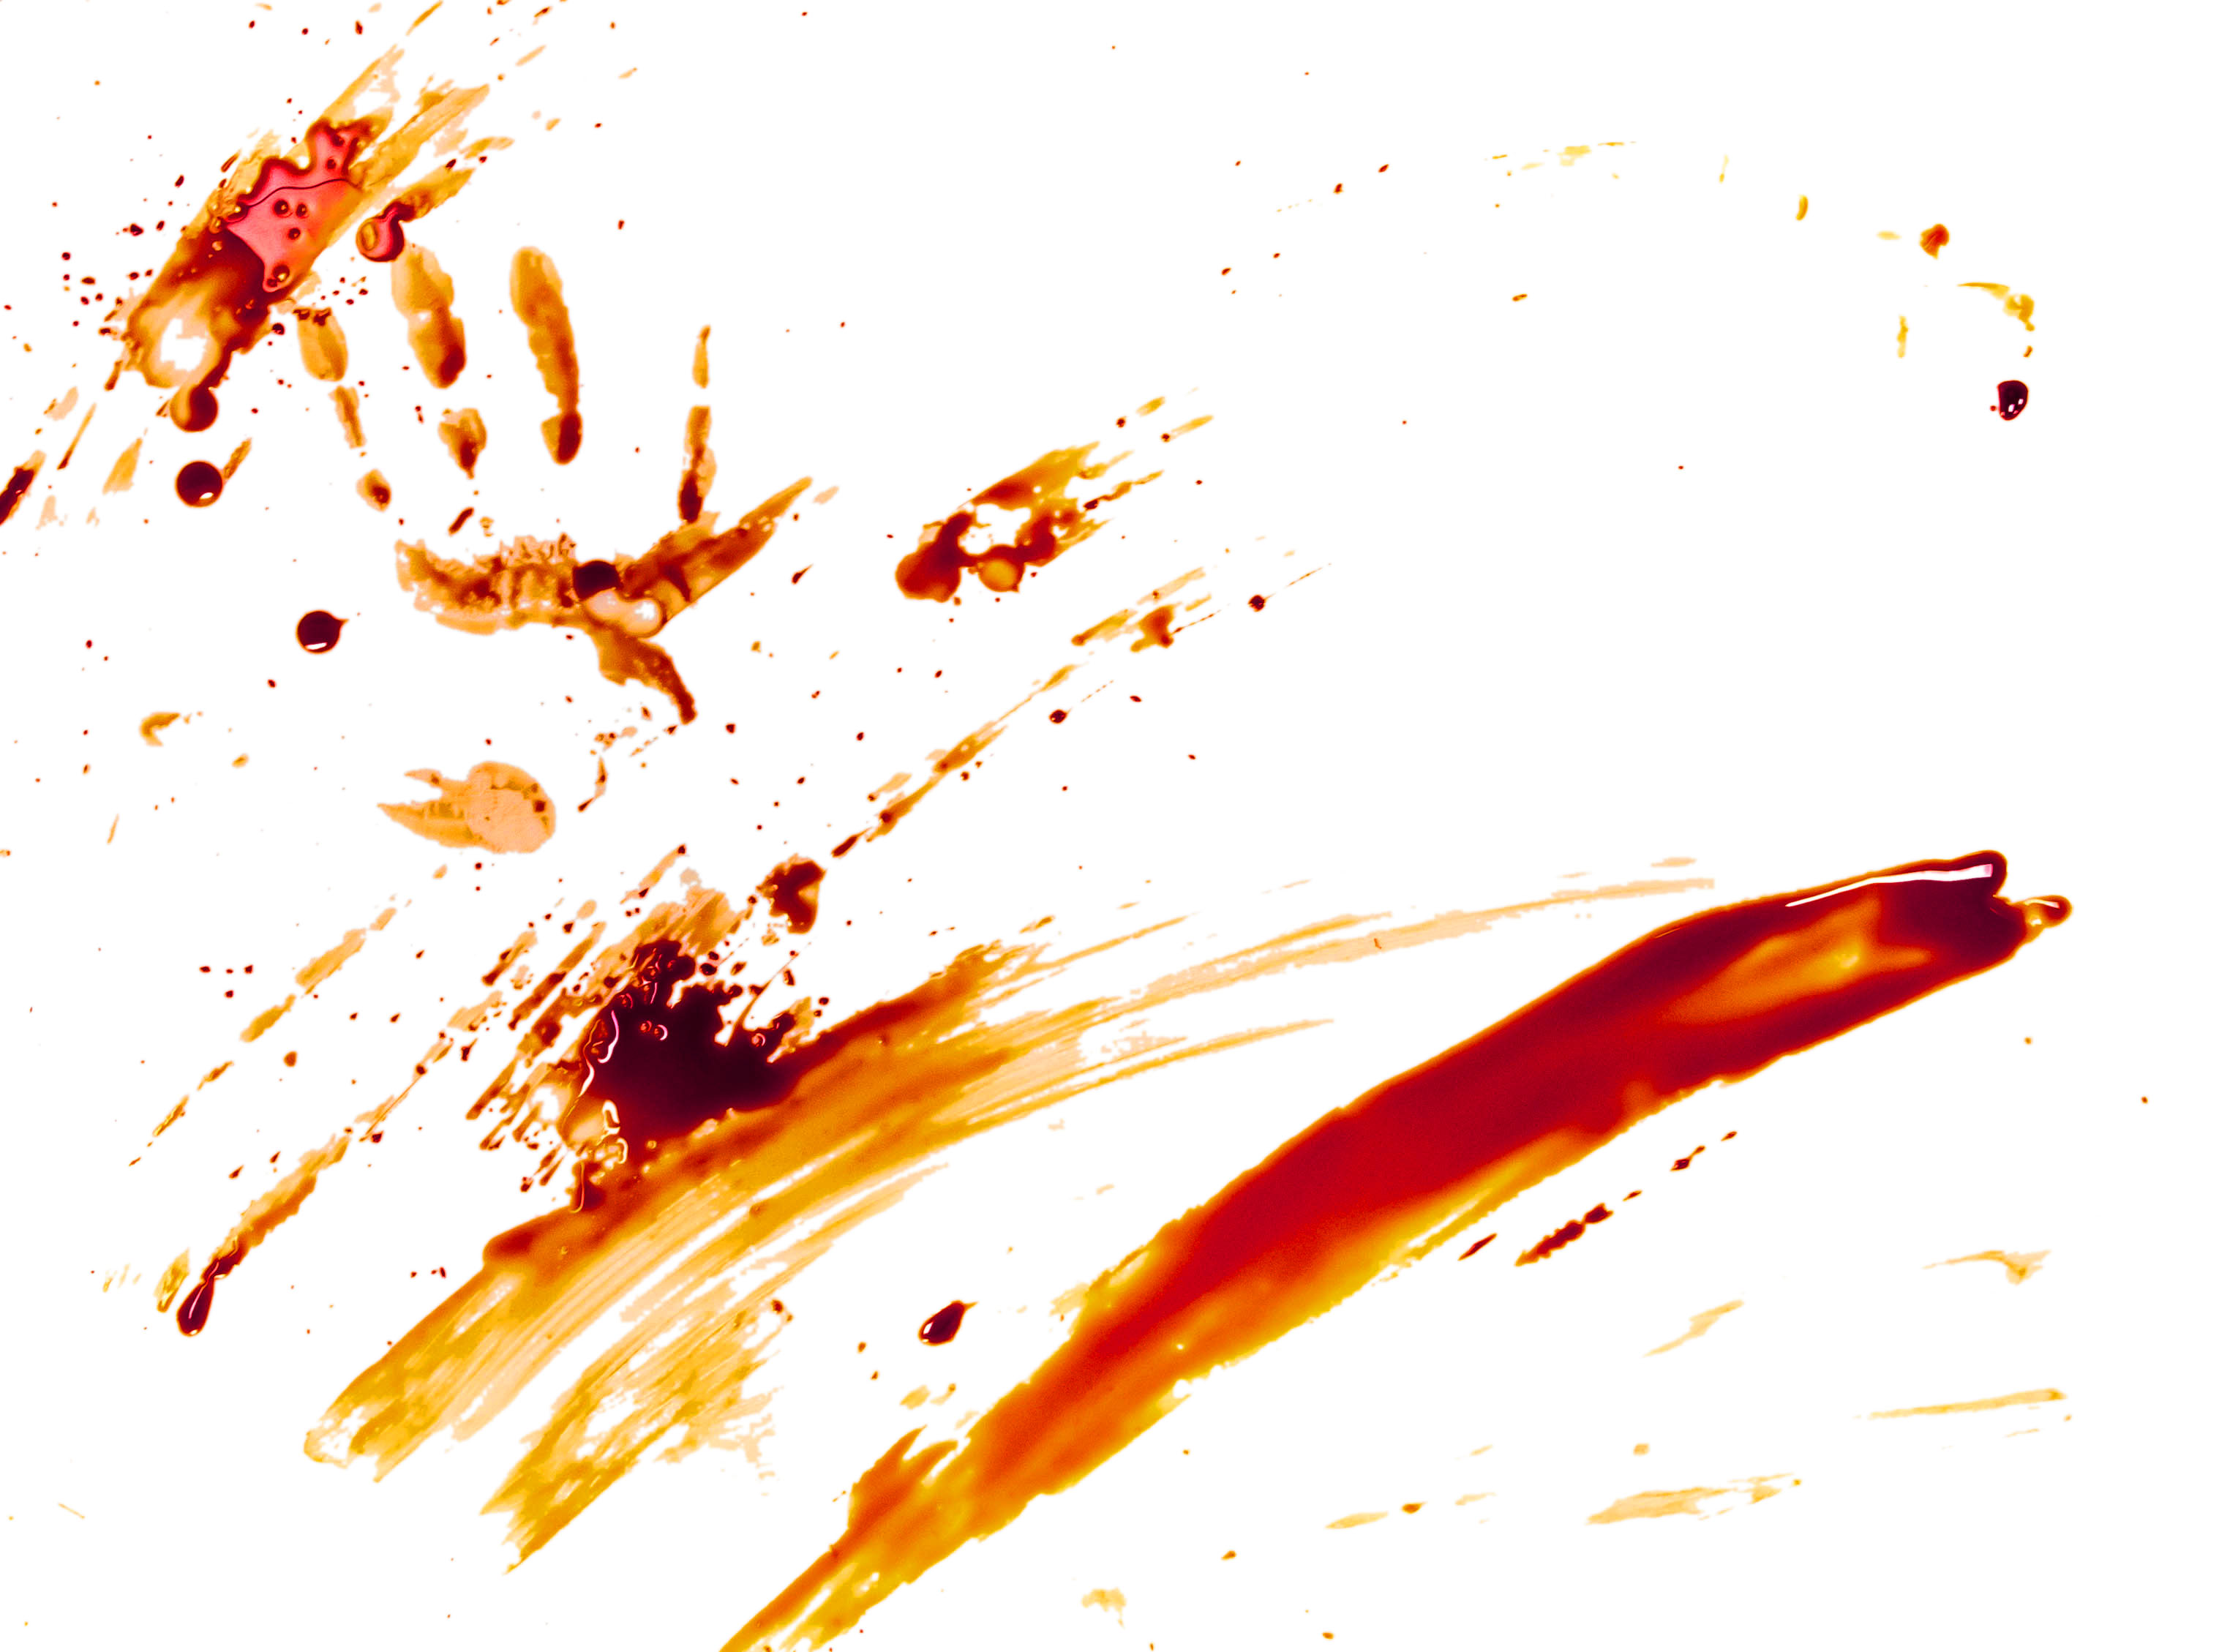 <p>Transfers occur when a blood source comes into contact with a surface. If a victim crawled on the floor or the body was dragged, then there would be smears or trails on the floor. Smudges, smears, or bloody fingerprints or handprints on furniture or doors could indicate a struggle in the room.</p>